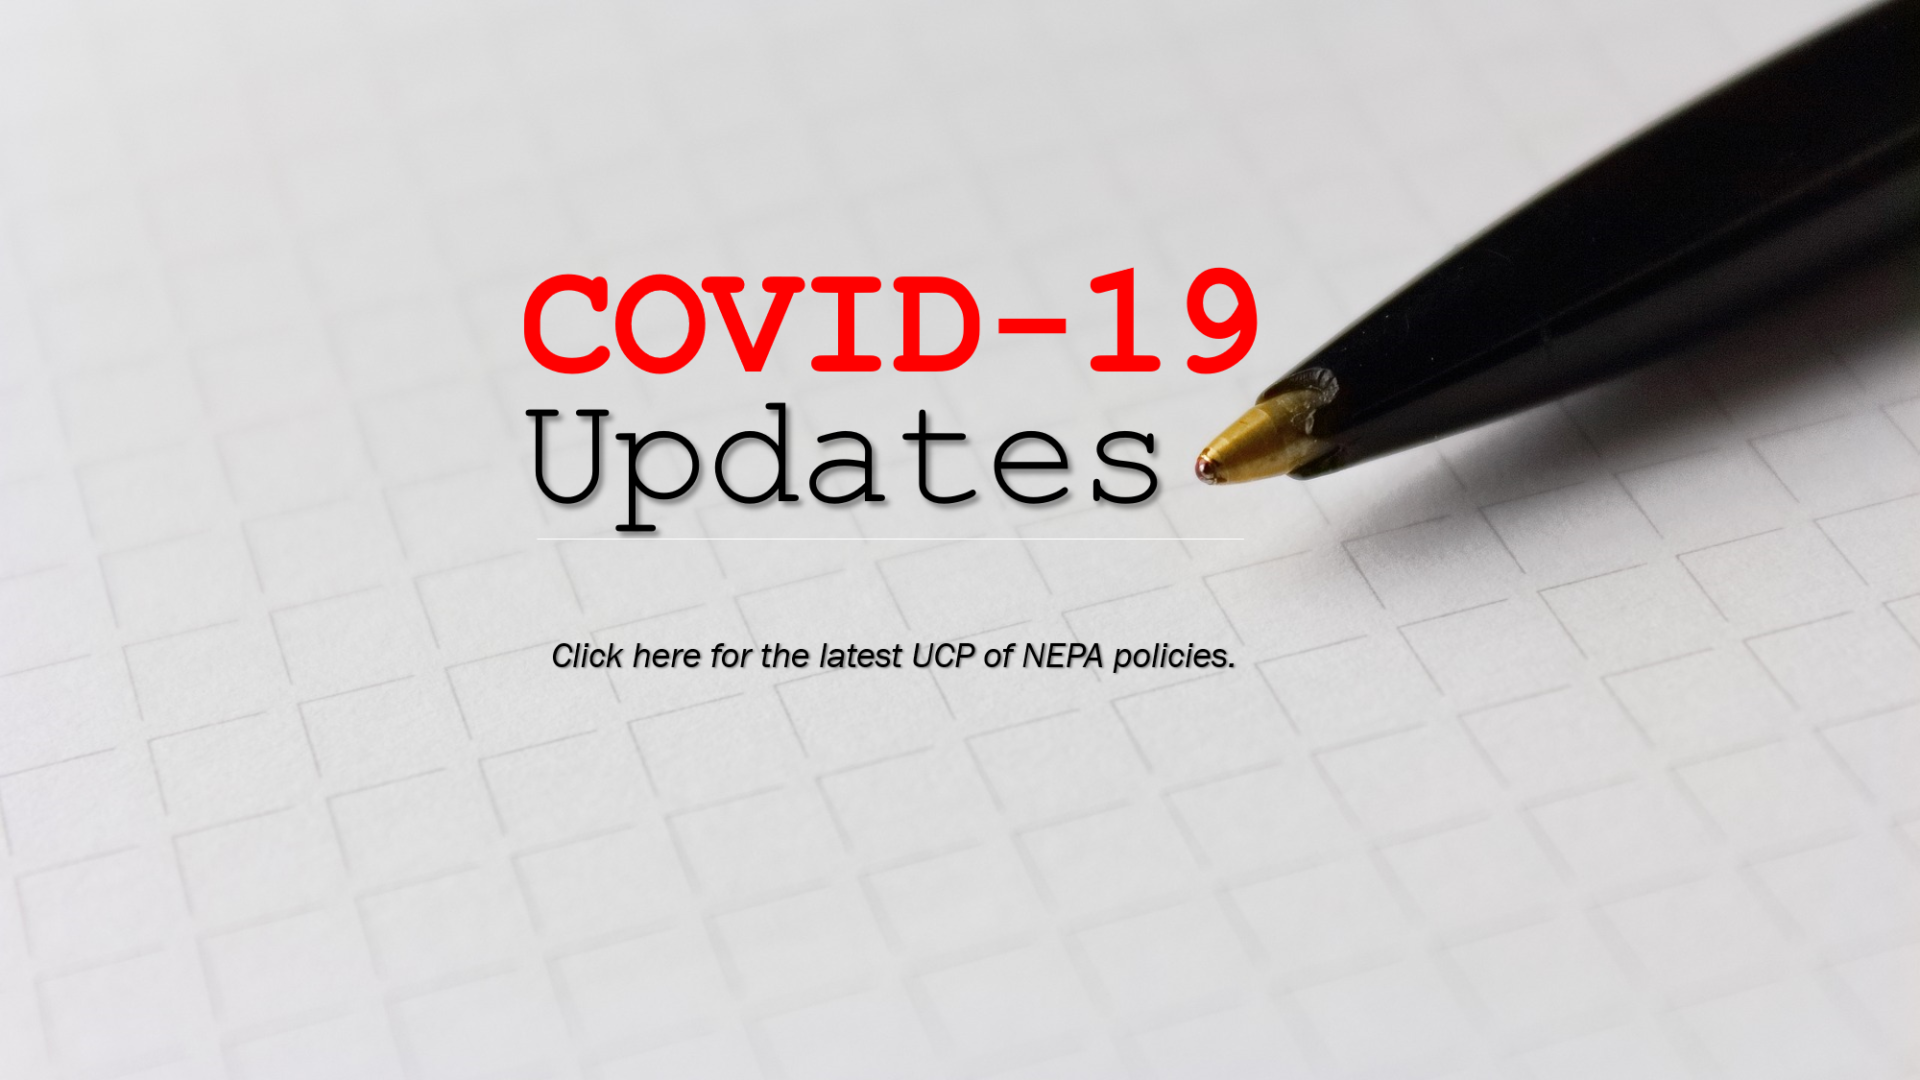 Get COVID-19 policy updates for UCP of NEPA.